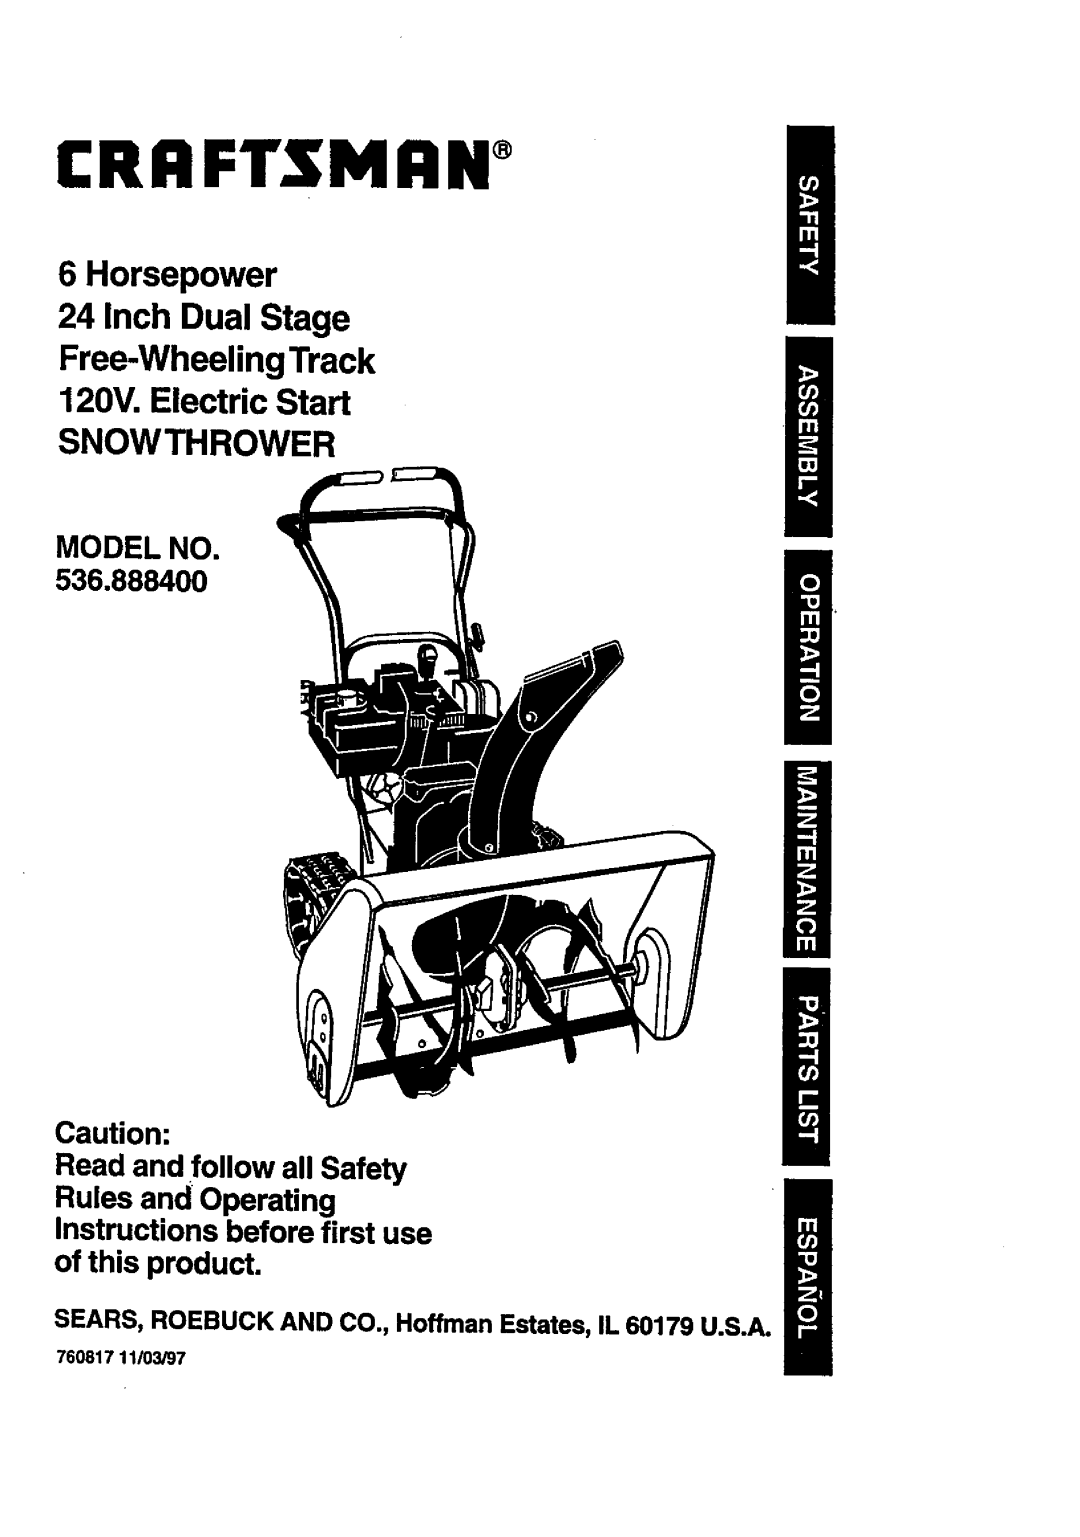 Craftsman 536.8884 manual Horsepower 24 Inch Dual Stage, Free-WheelingTrack 120V. Electric Start, Snowthrower, Crr Ftsmrw 